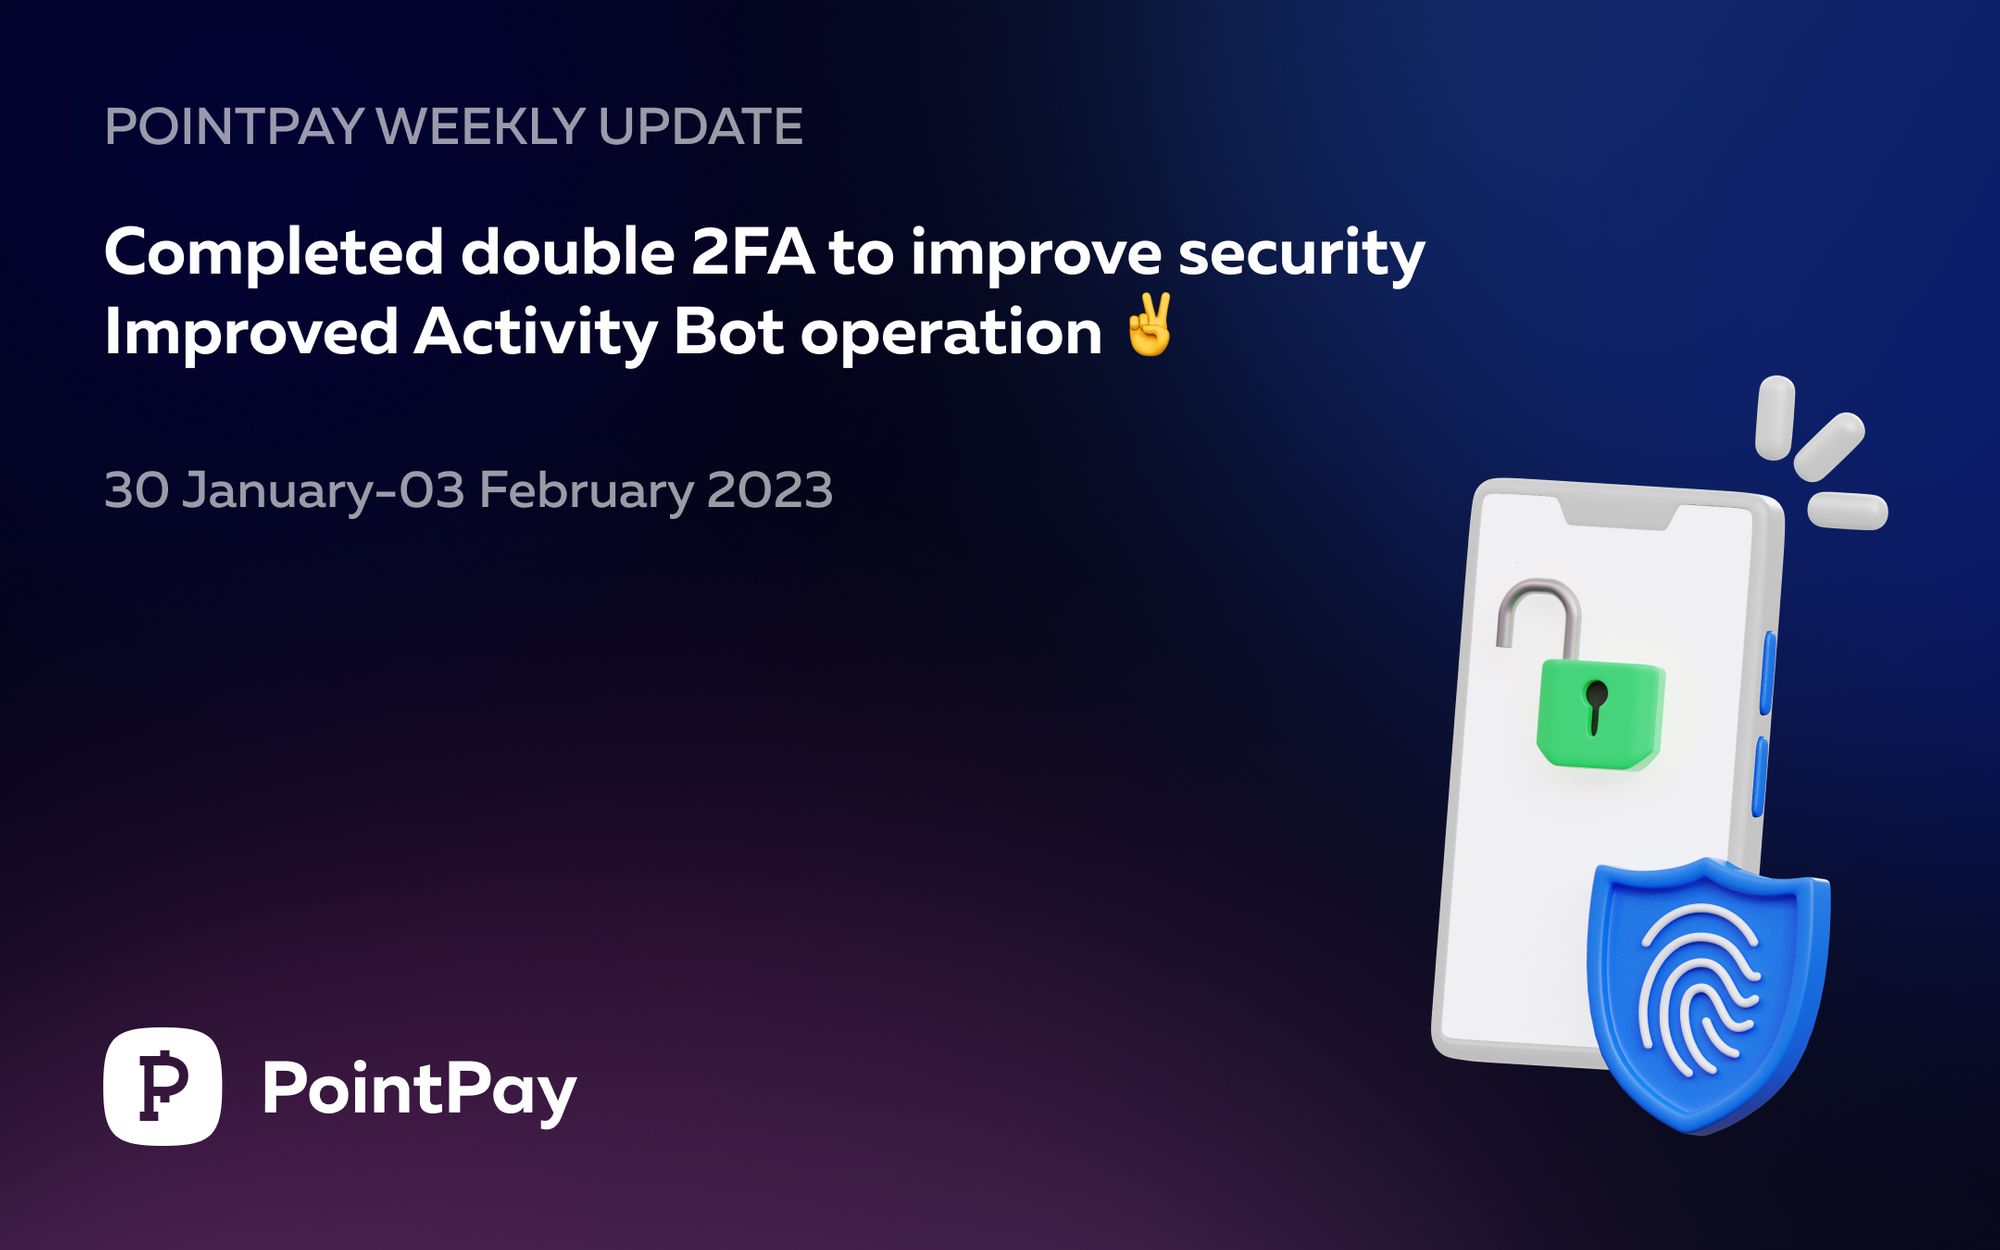 PointPay Weekly Update (30 January - 3 February 2023)